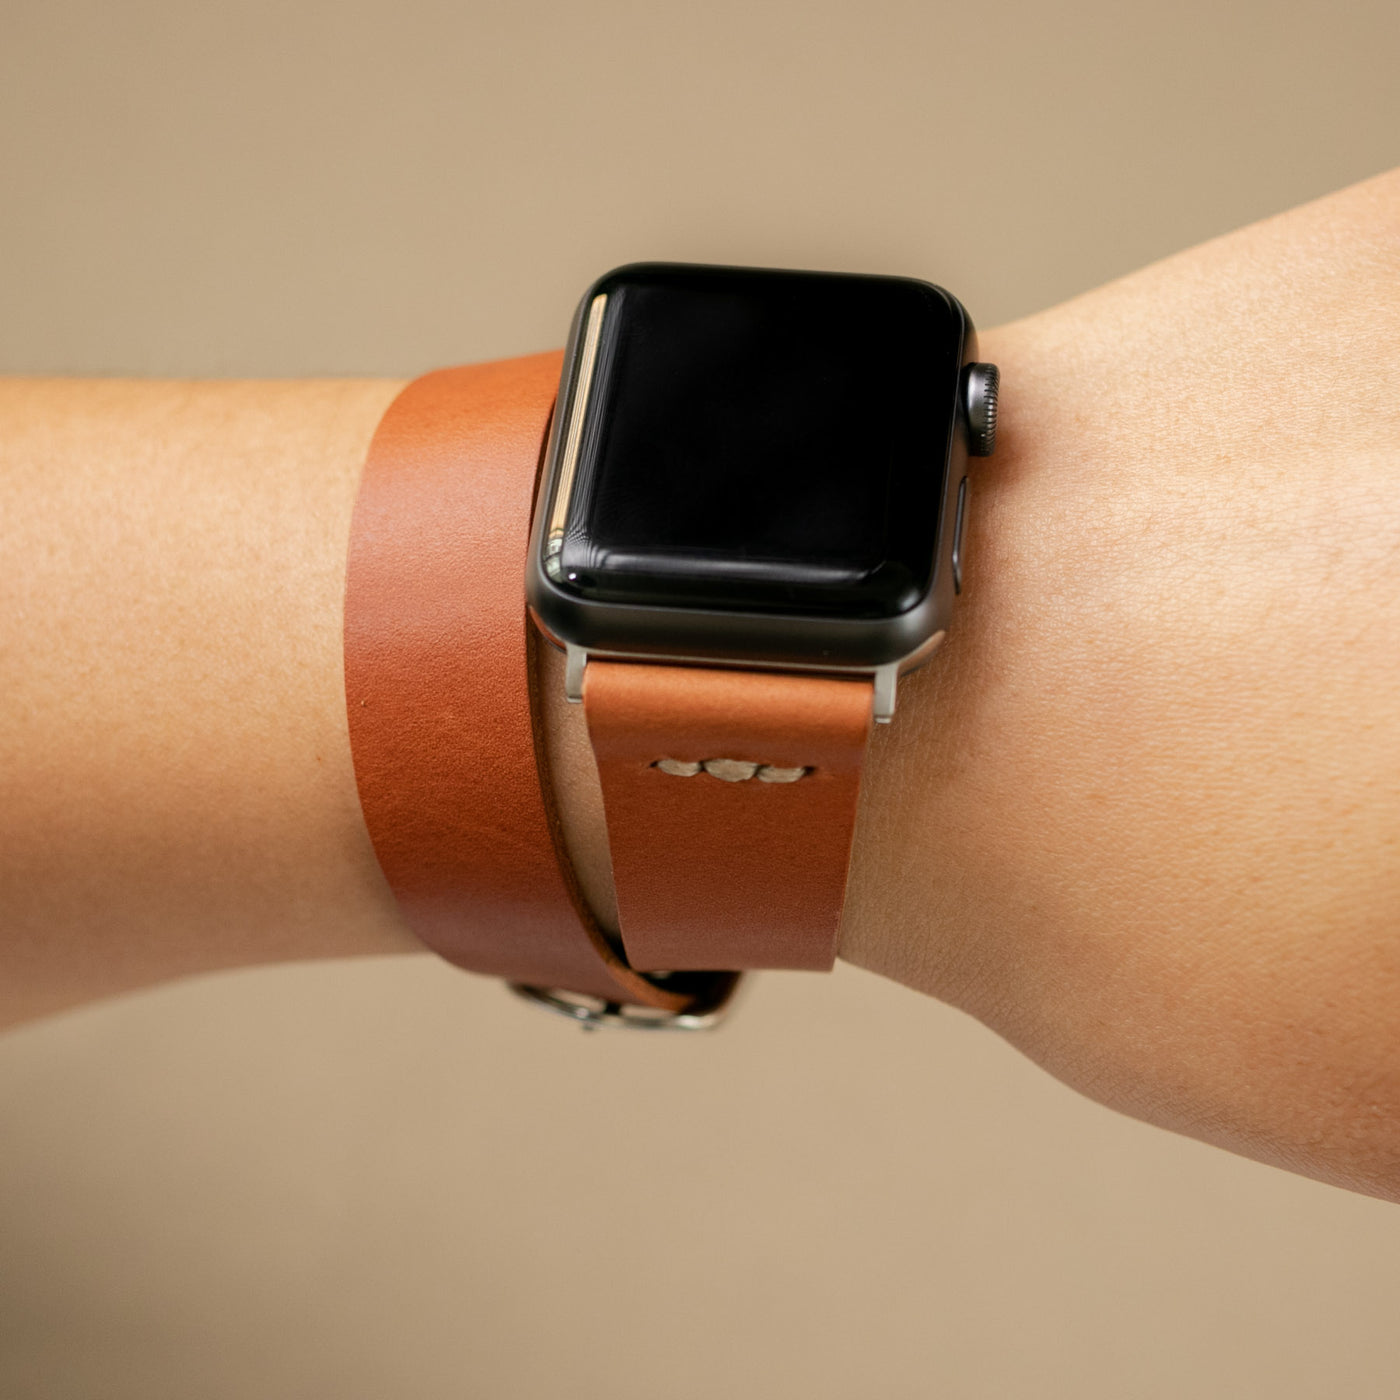 Double Tour Apple Watch Leather Strap